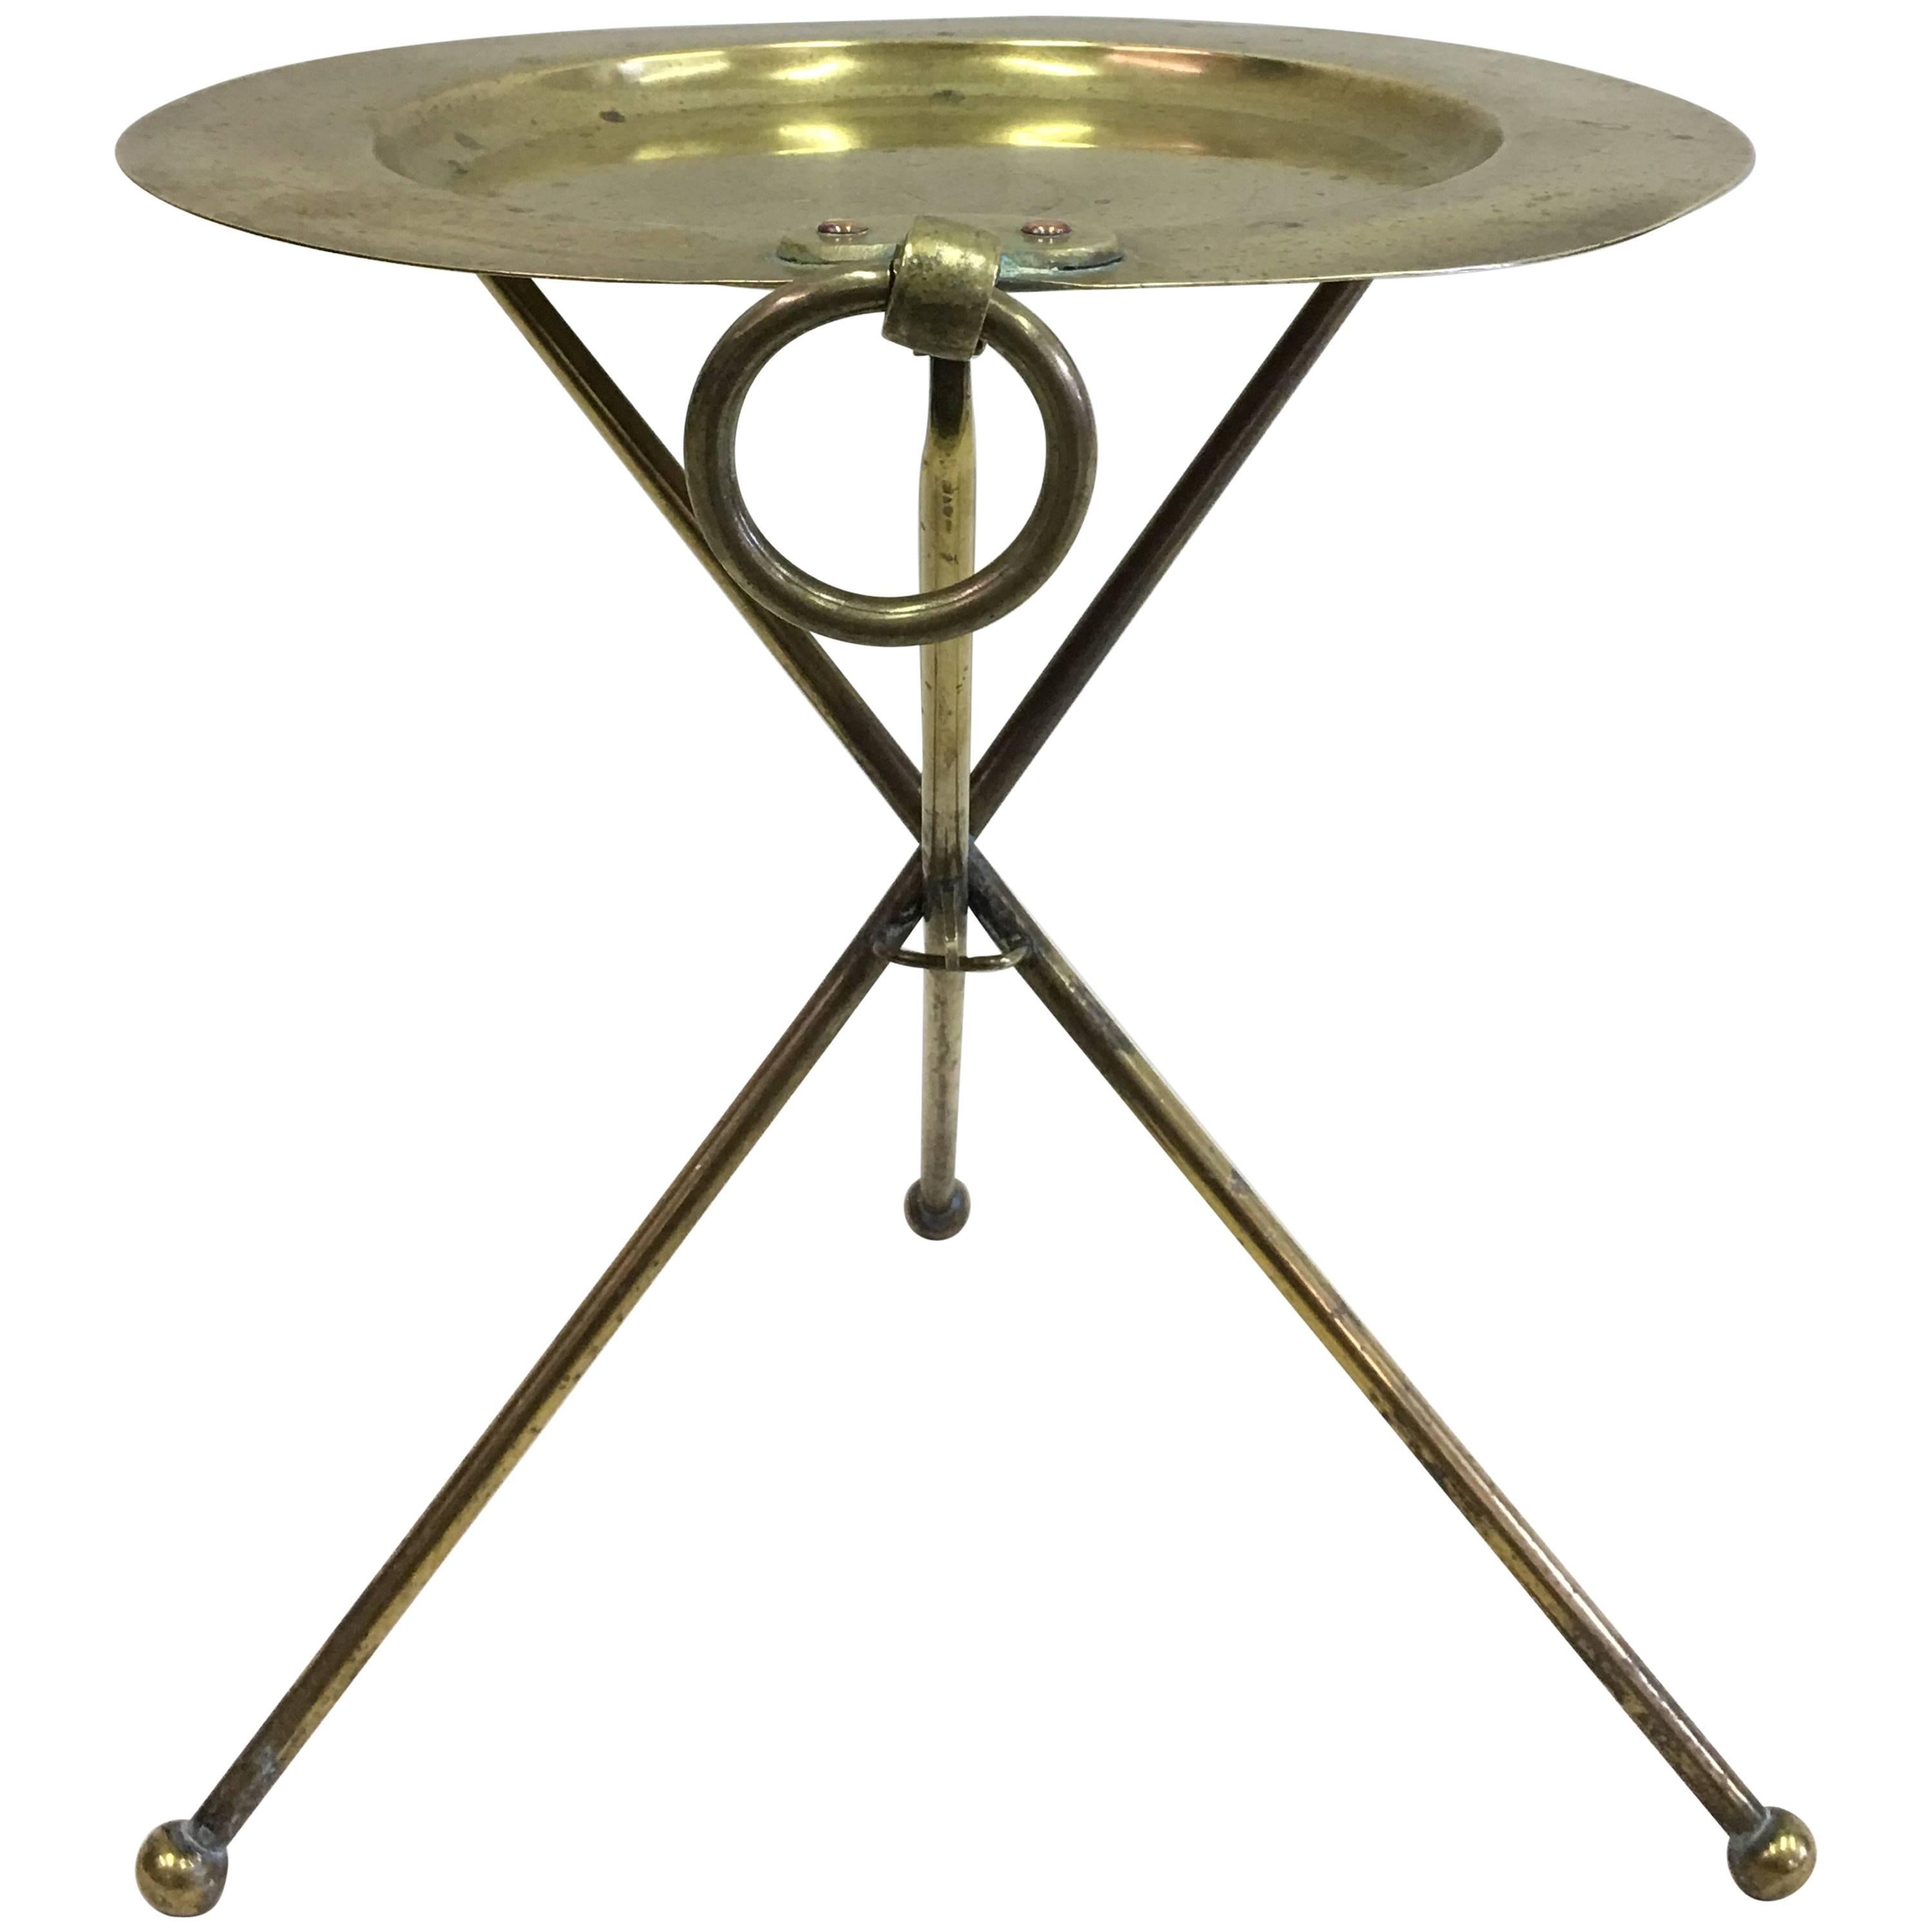 French Mid-Century Modern Neoclassical Solid Brass Guéridon or Side Table For Sale